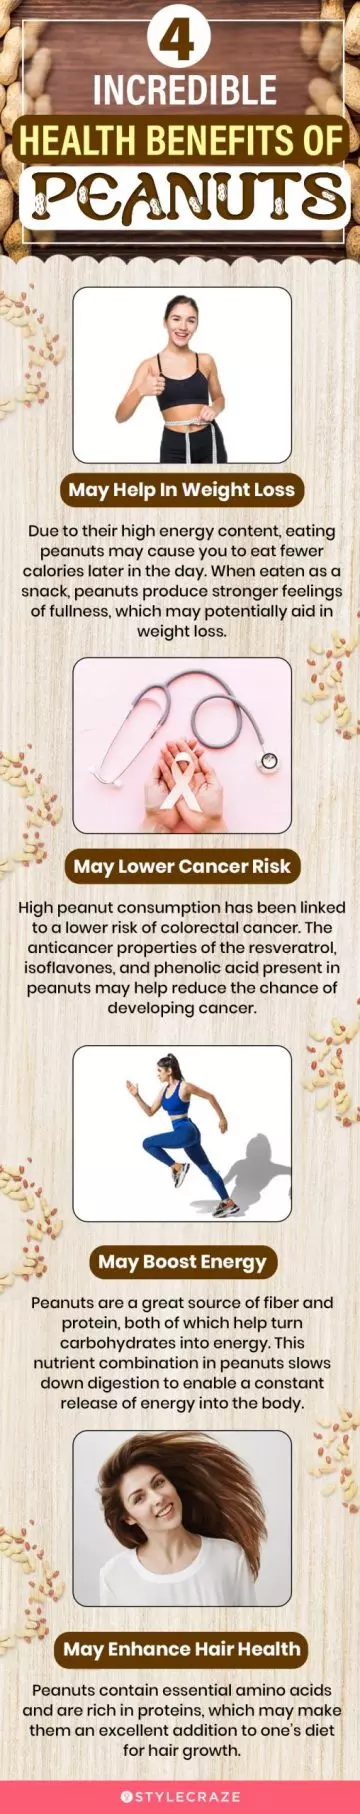 4 incredible health benefits of peanuts (infographic)